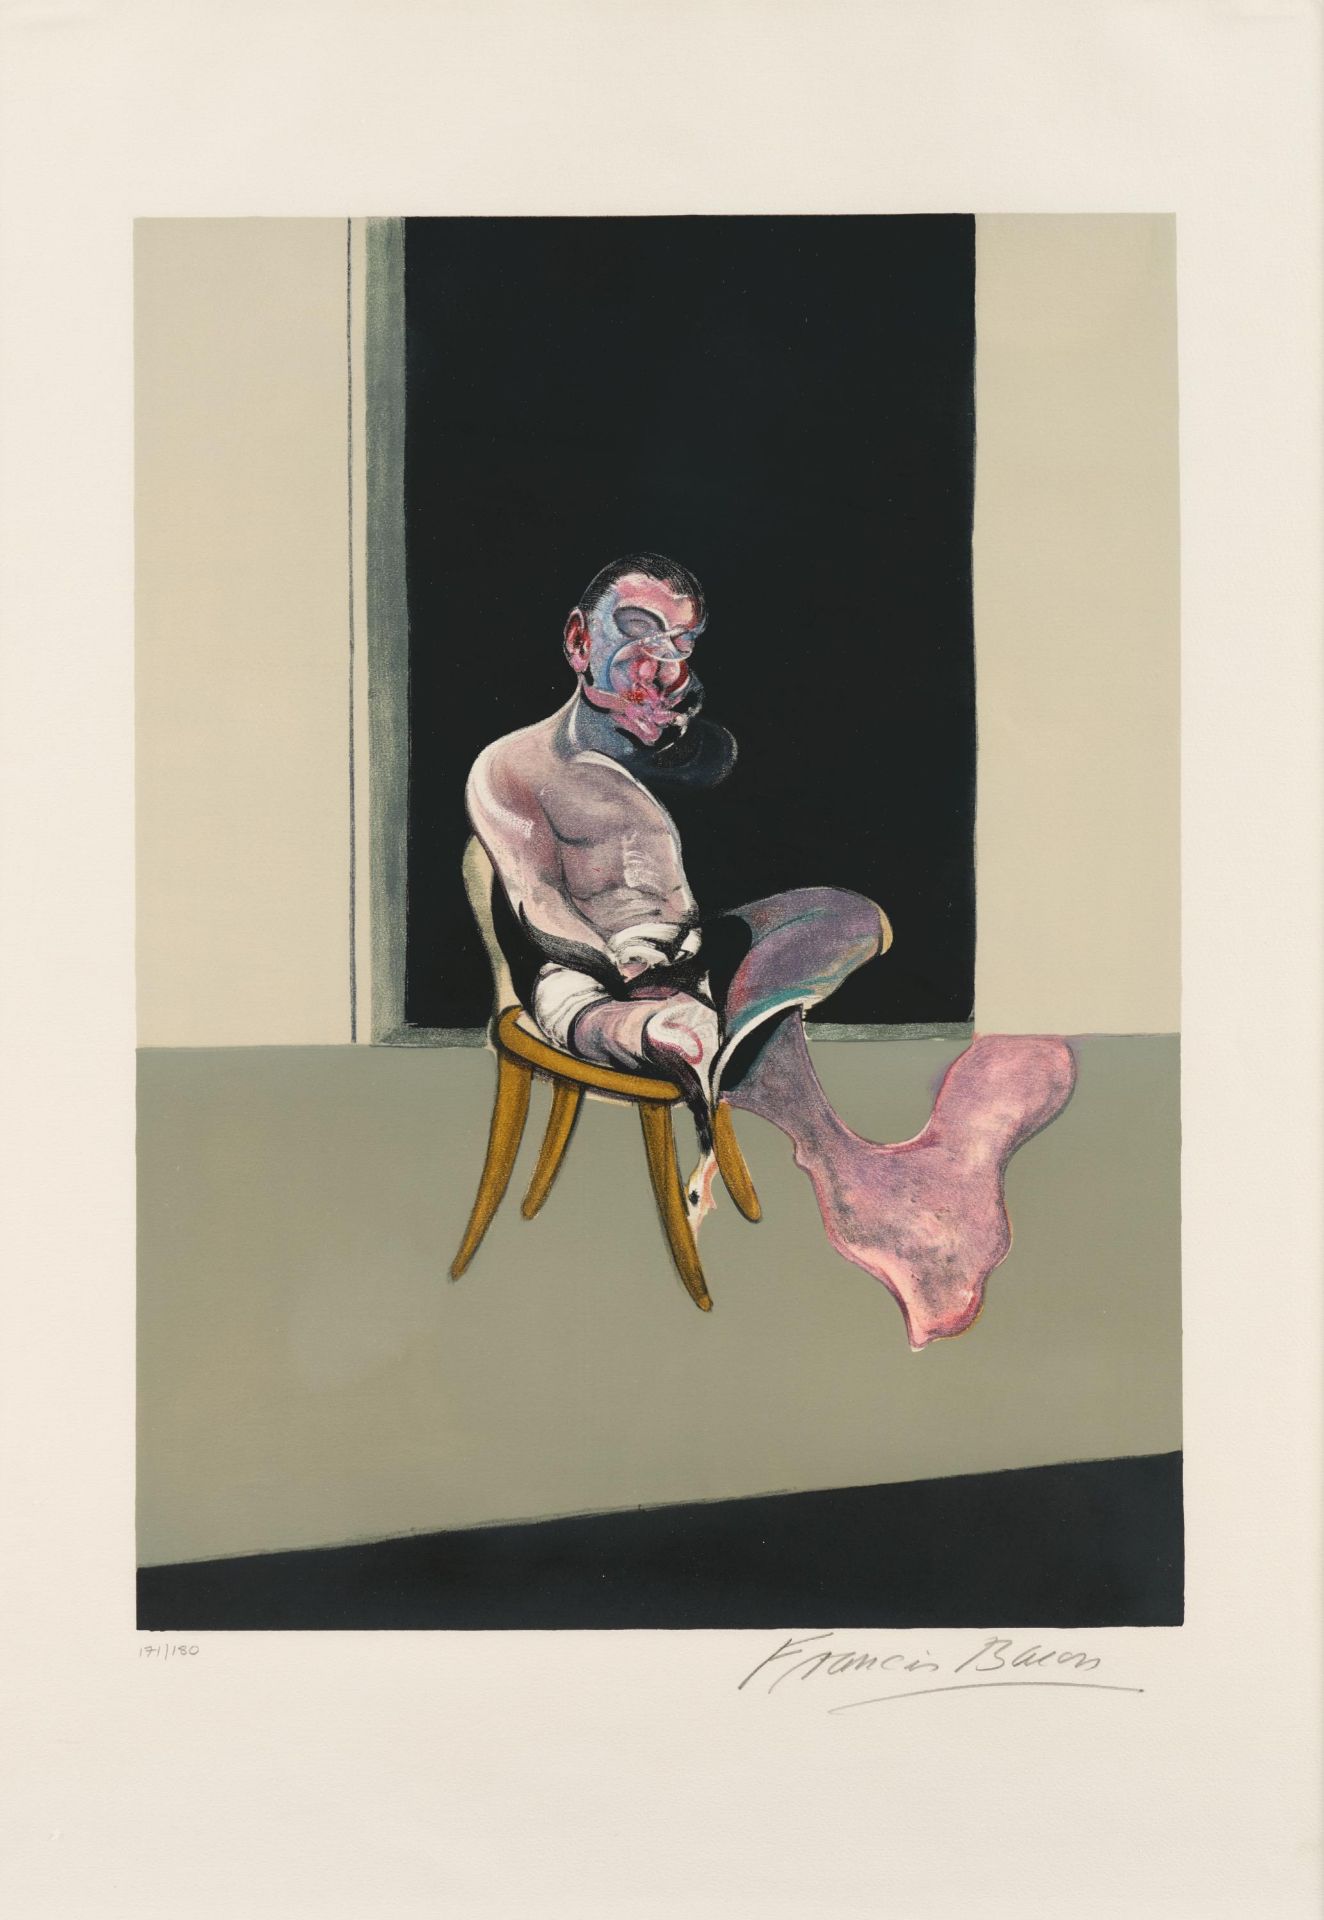 Francis Bacon: Triptych Août 1972 - Image 8 of 10